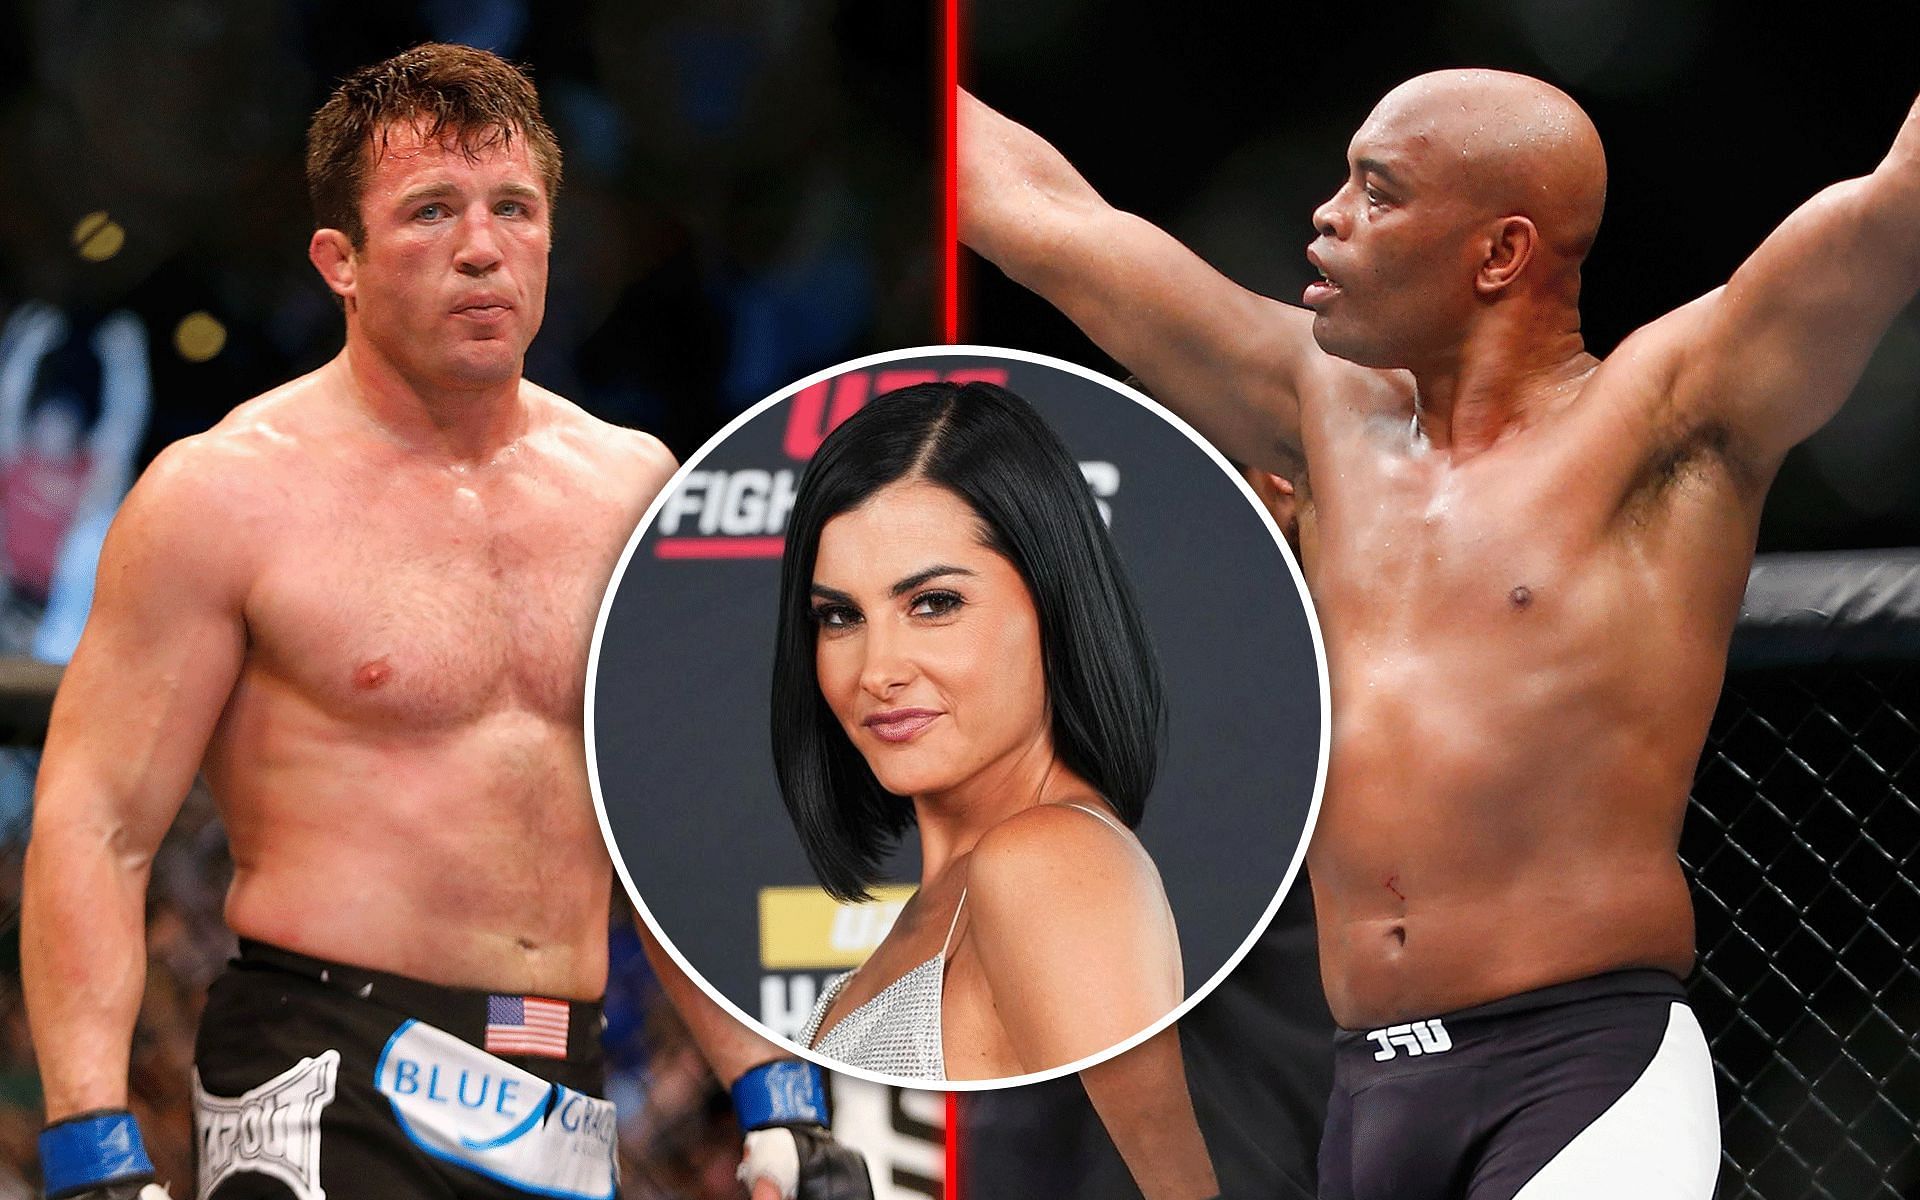 Megan Olivi (inset) on hiding the Hall of Fame induction of the Chael Sonnen (left) vs. Anderson Silva (right) fight [Images courtesy: @meganolivi on Instagram and Getty]